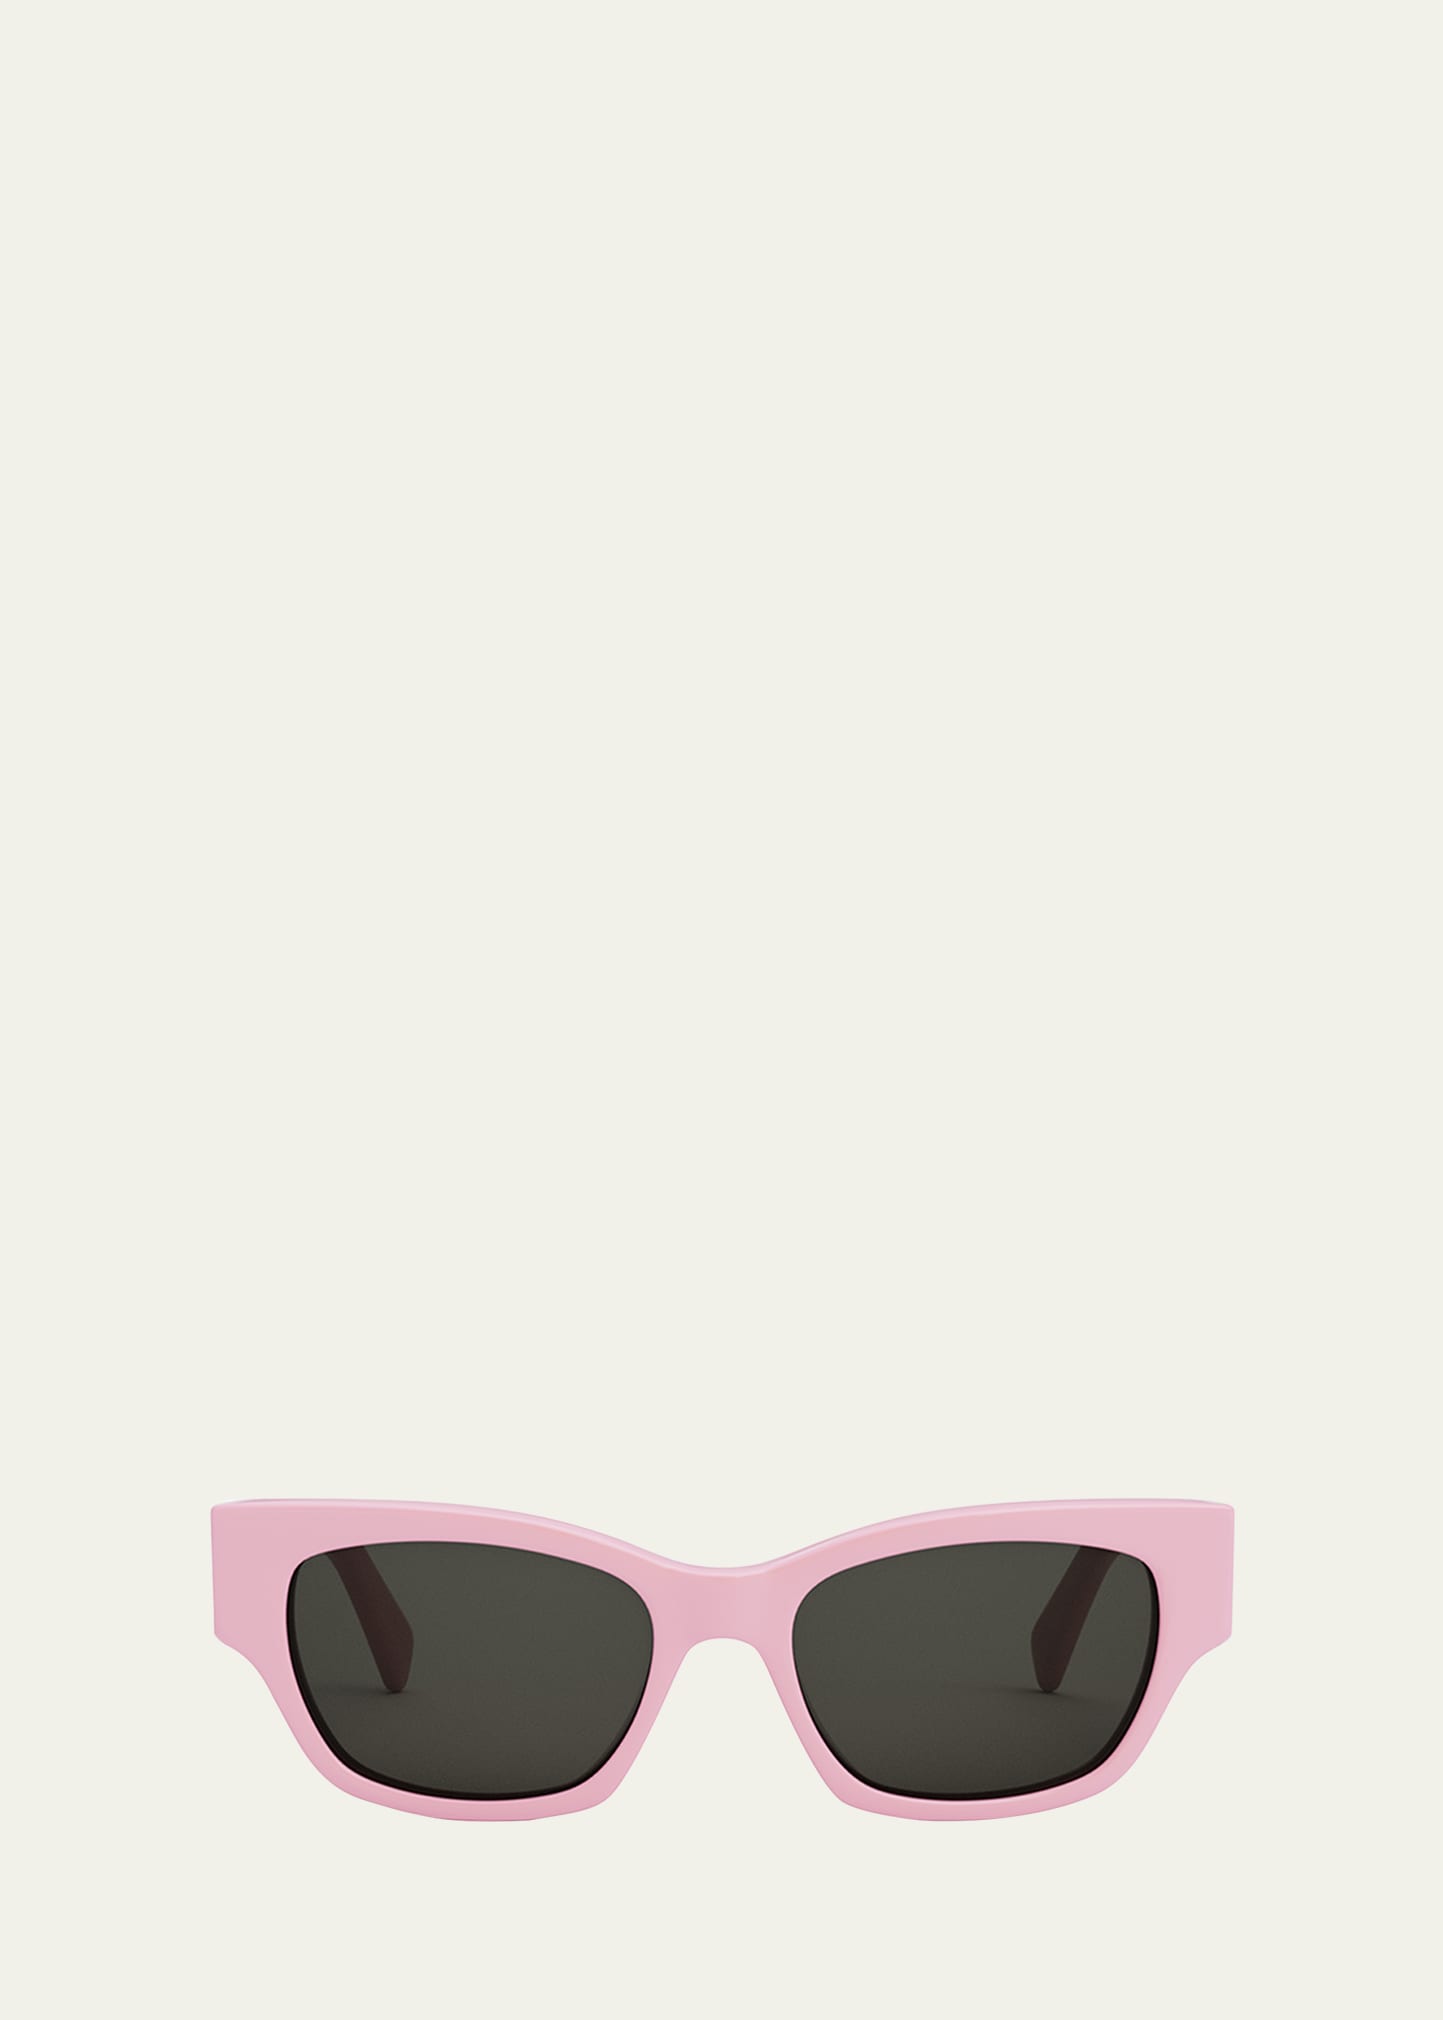 Celine Rectangle Acetate Sunglasses In 72a Shiny Pink